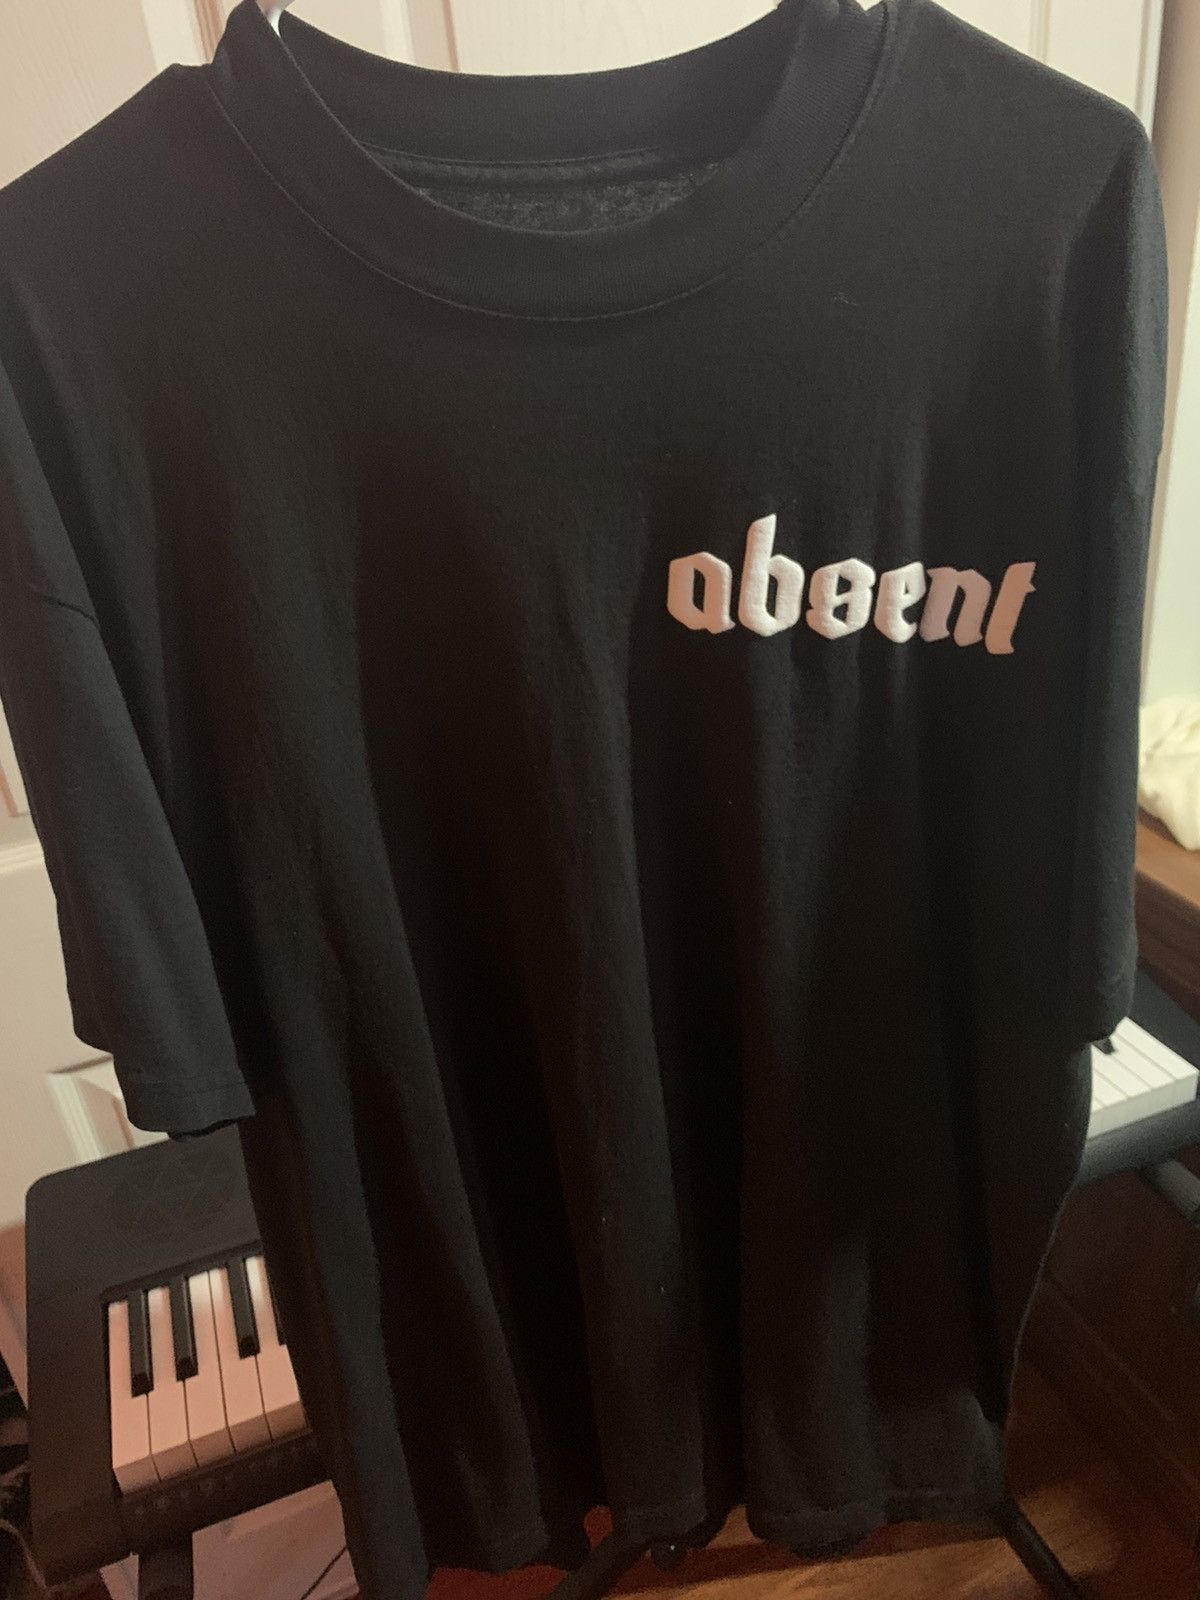 Absent absent usa black basic tee | Grailed